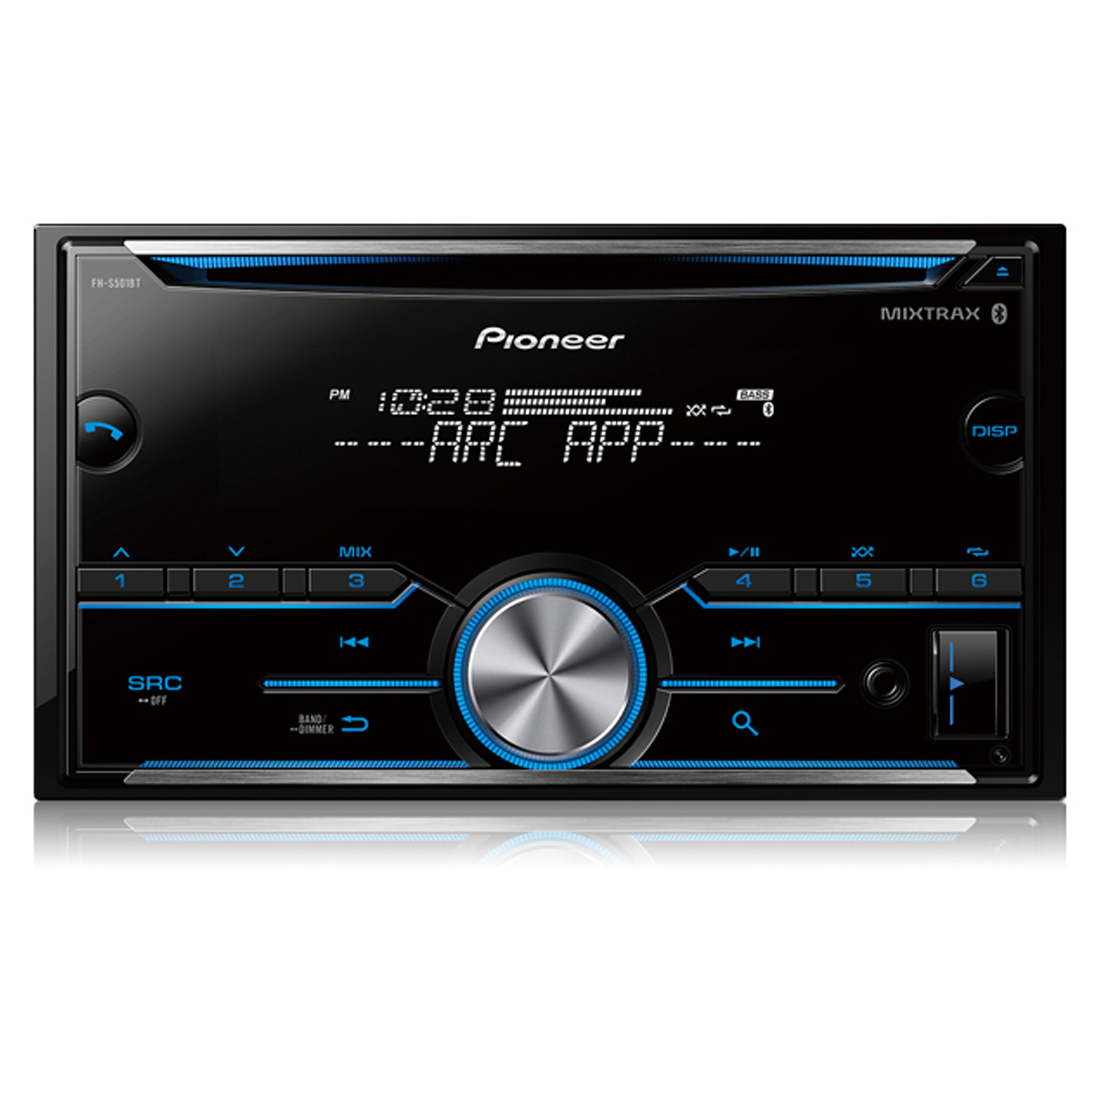 Pioneer Fh-S501Bt Double Din Cd Receiver With Mixtrax - Pioneer Fh-S501Bt Wiring Diagram